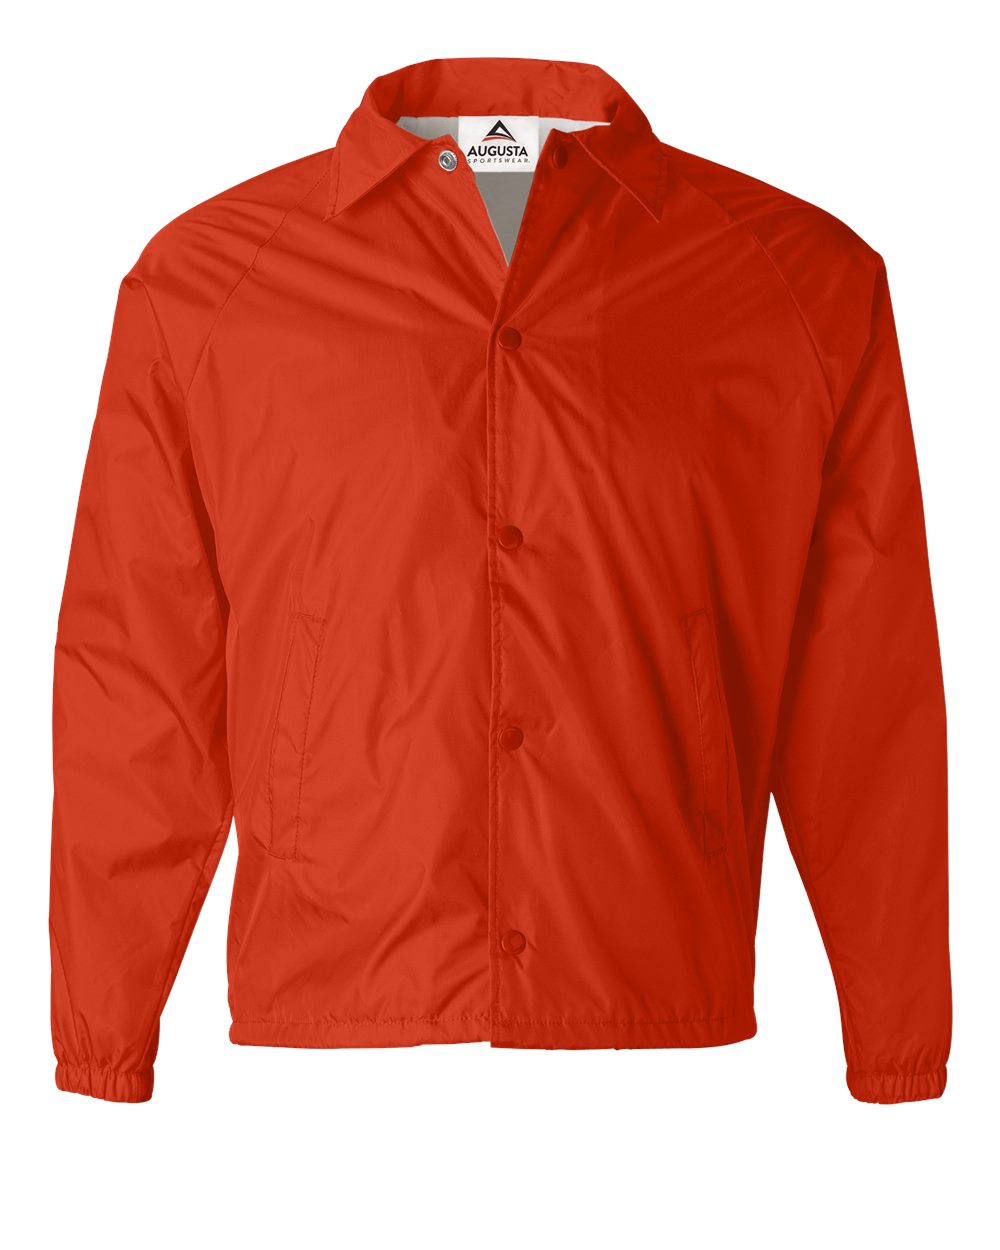 Fraternity Coach's Jacket - Greek Apparel and Clothing – Something